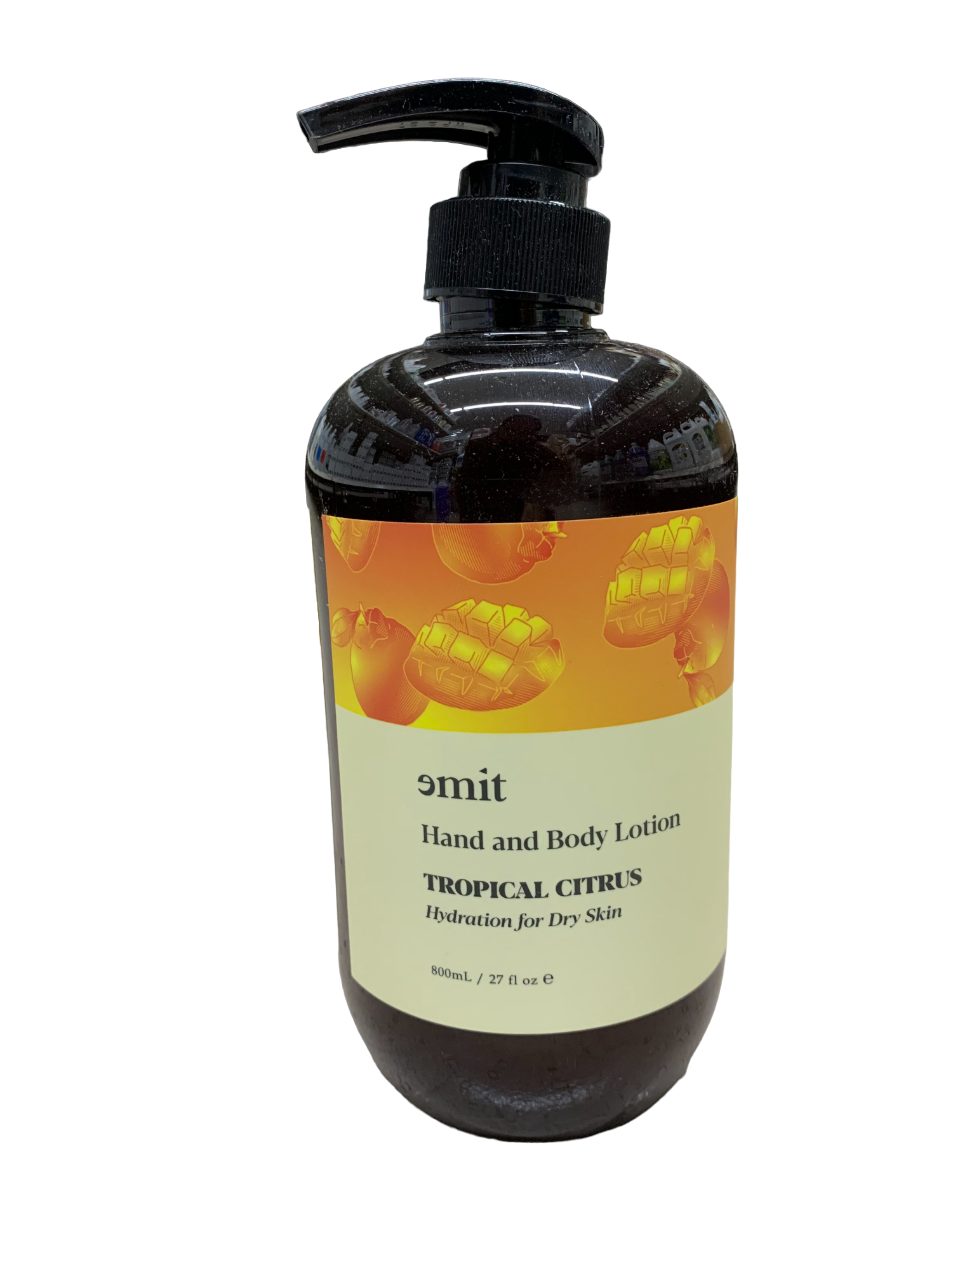 Emit Hand and Body Lotion Tropical Citrus